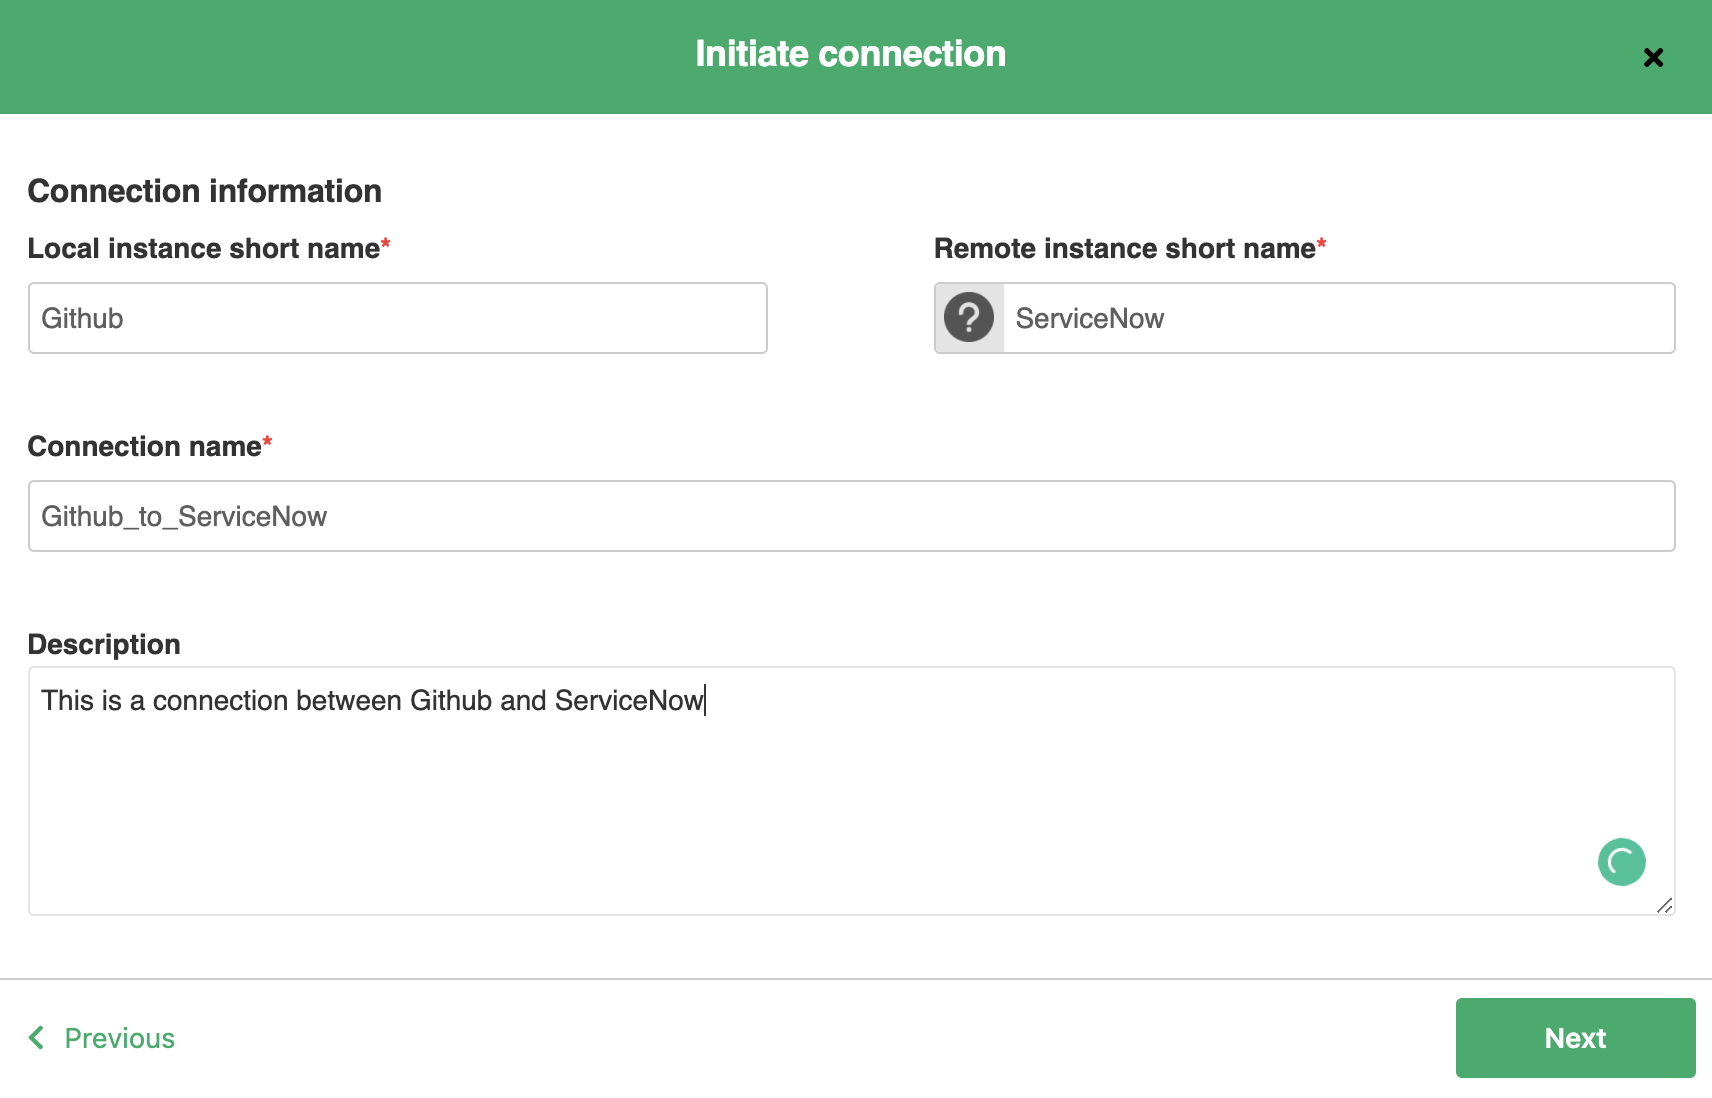 Initiate connection from Github to ServiceNow